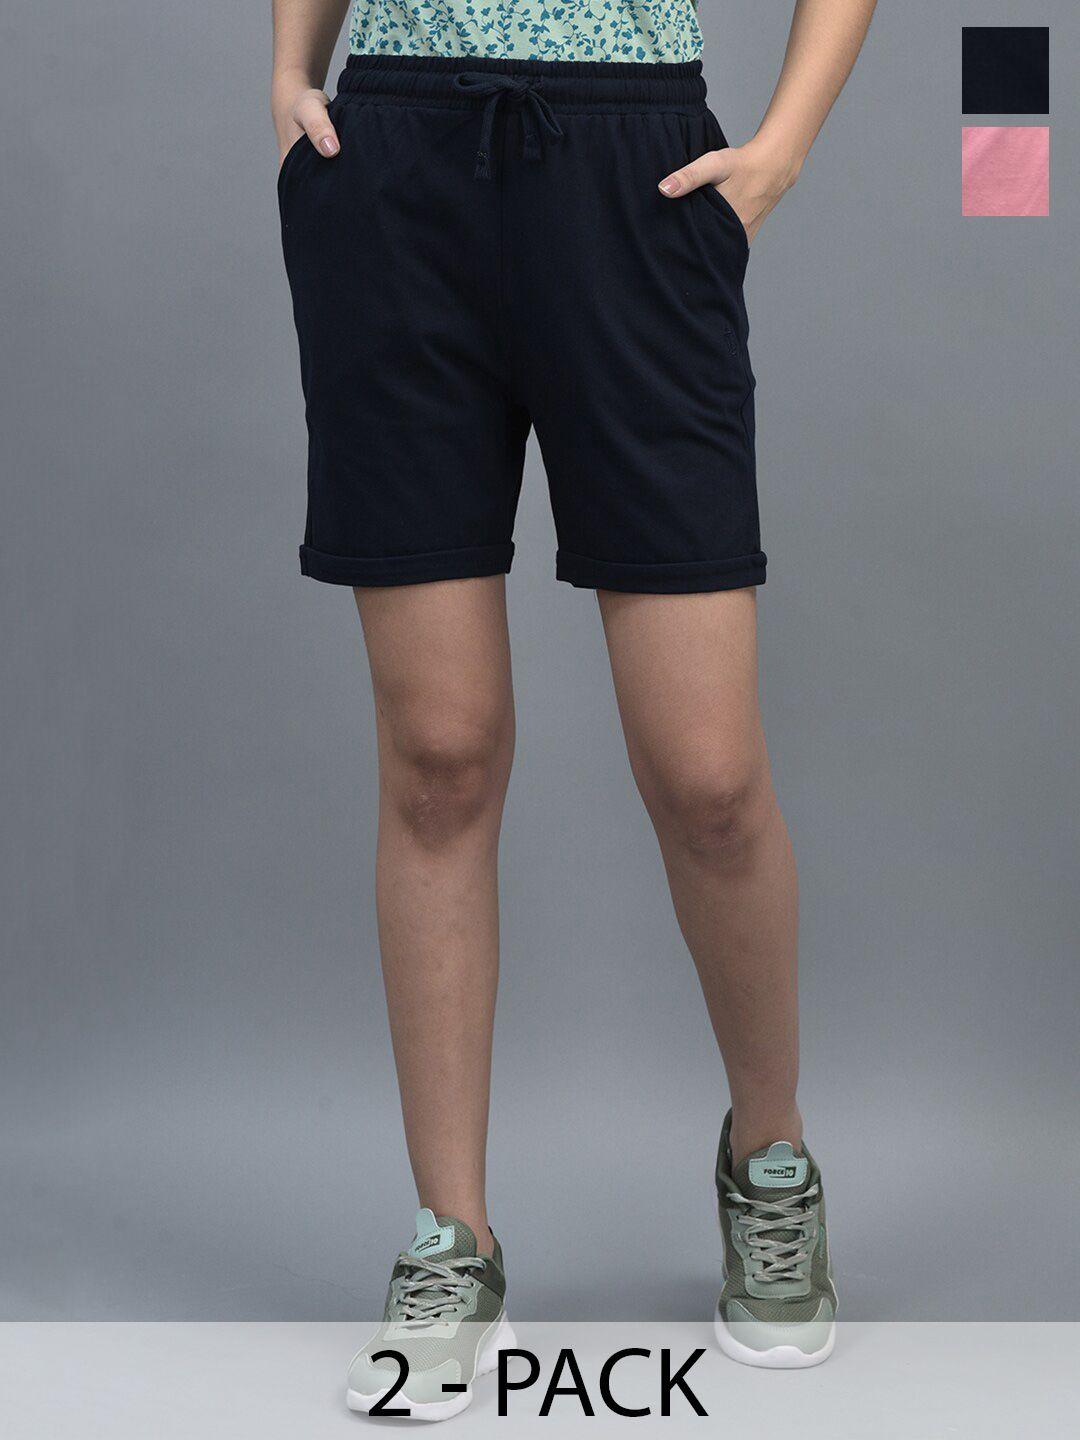 dollar-pack-of-2-cotton-sports-shorts